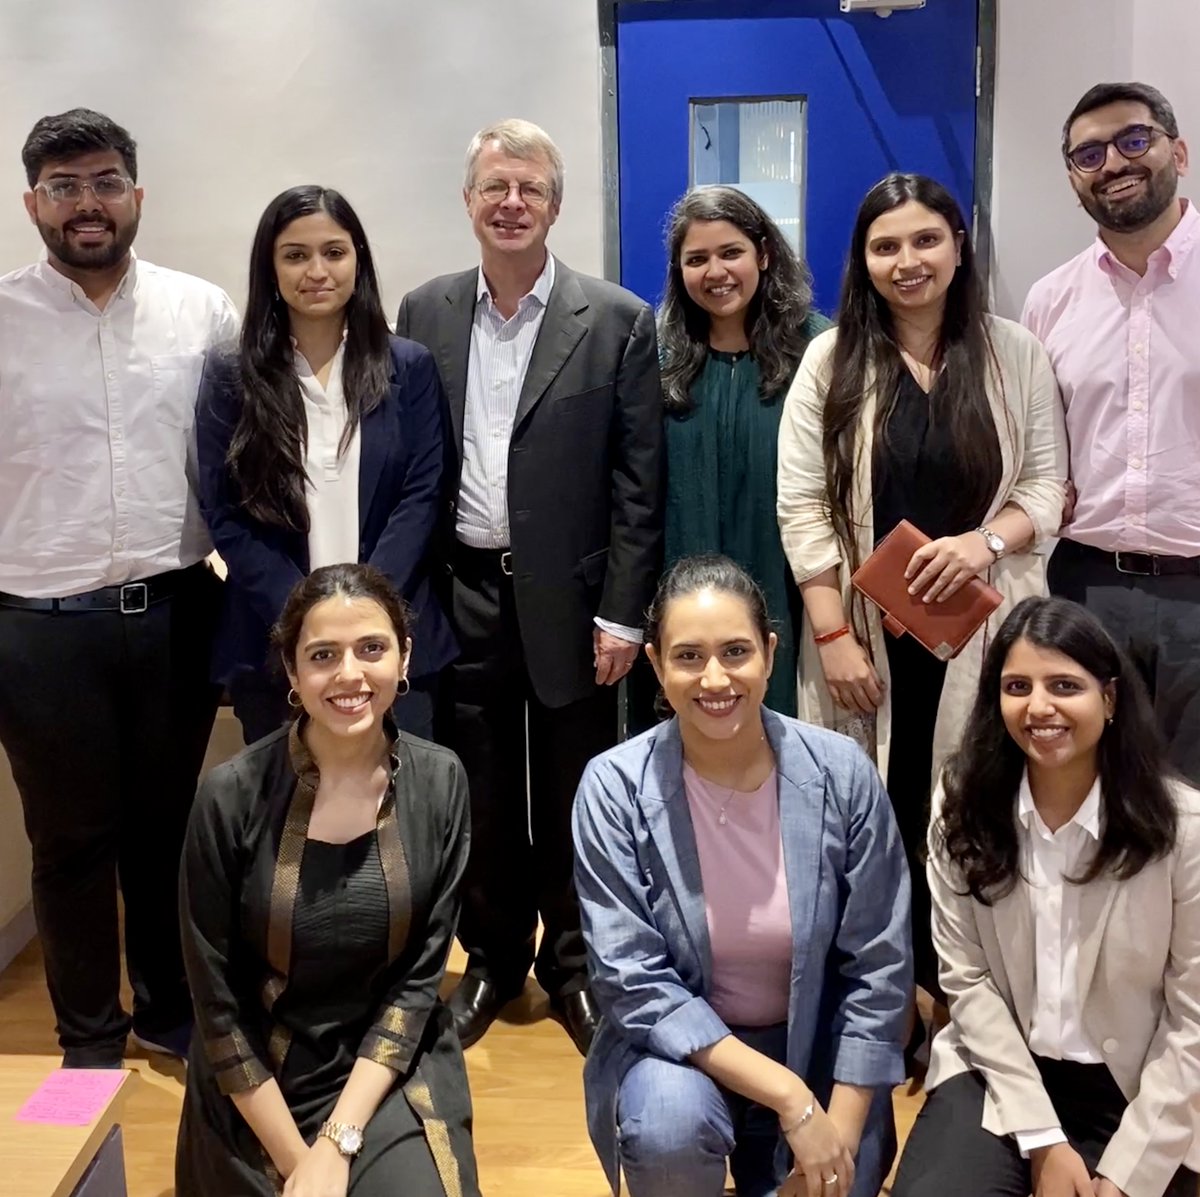 The best way to wrap up the week 🙌 Our managers spent some super productive time with one of our investors Peter Wuffli, founder of @eleaFoundation at our Delhi office!